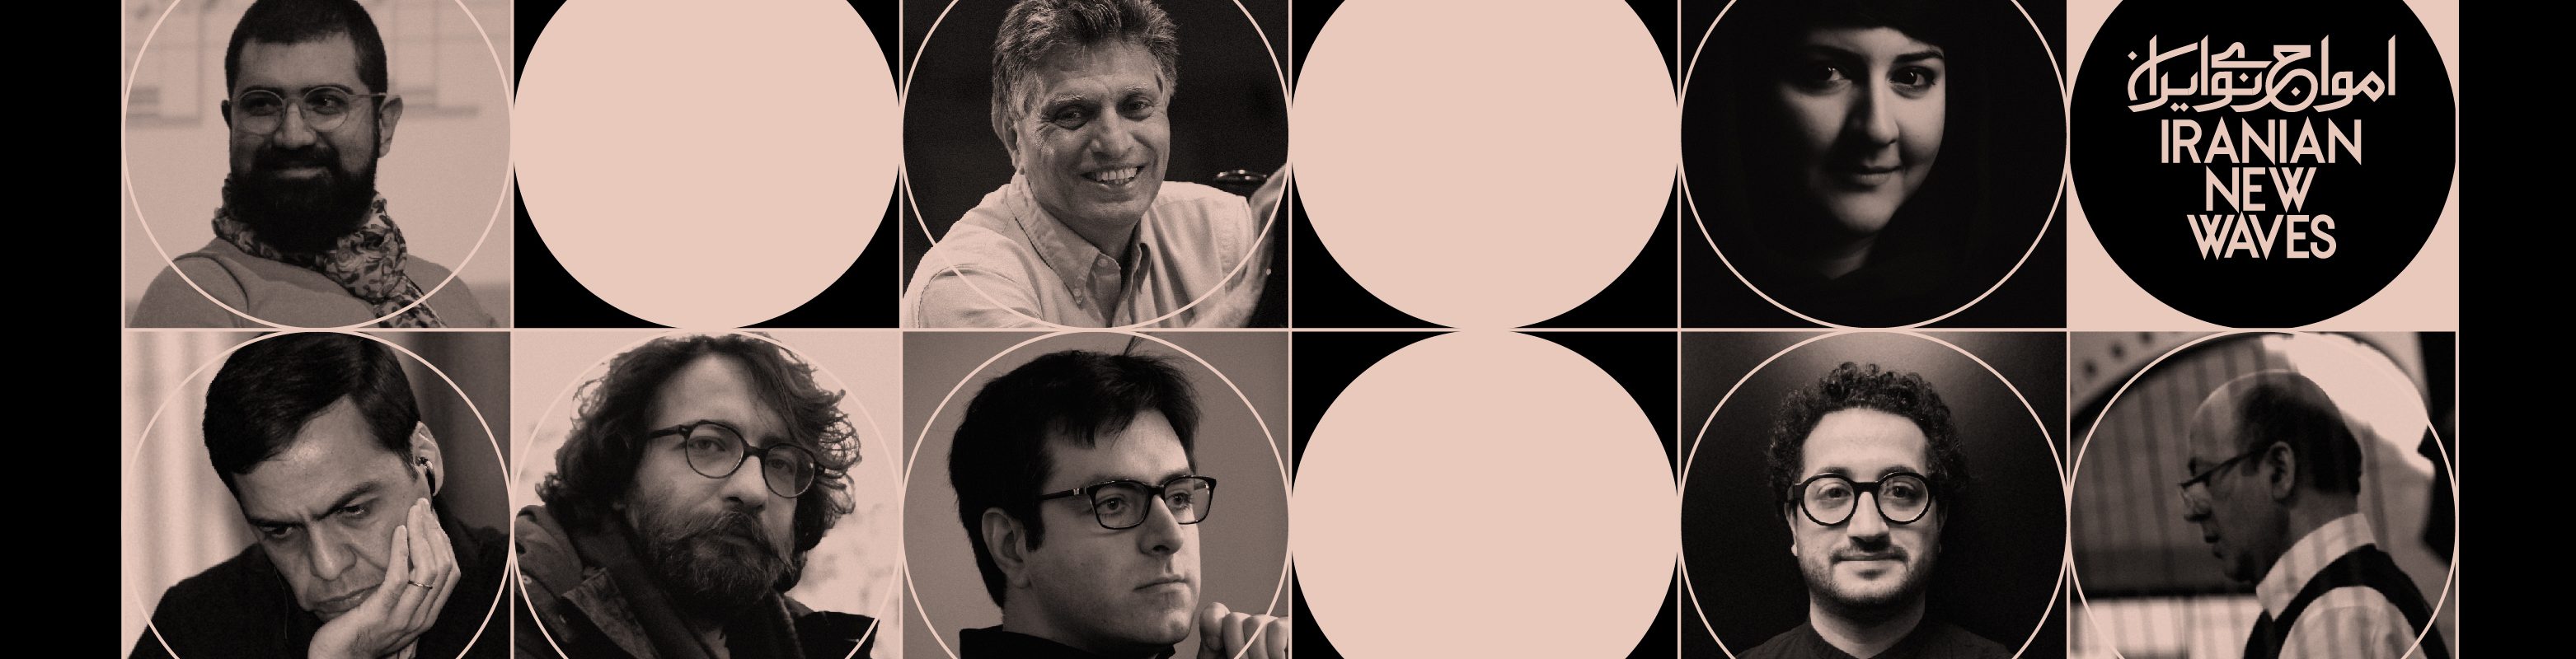 Iranian New Waves Composers